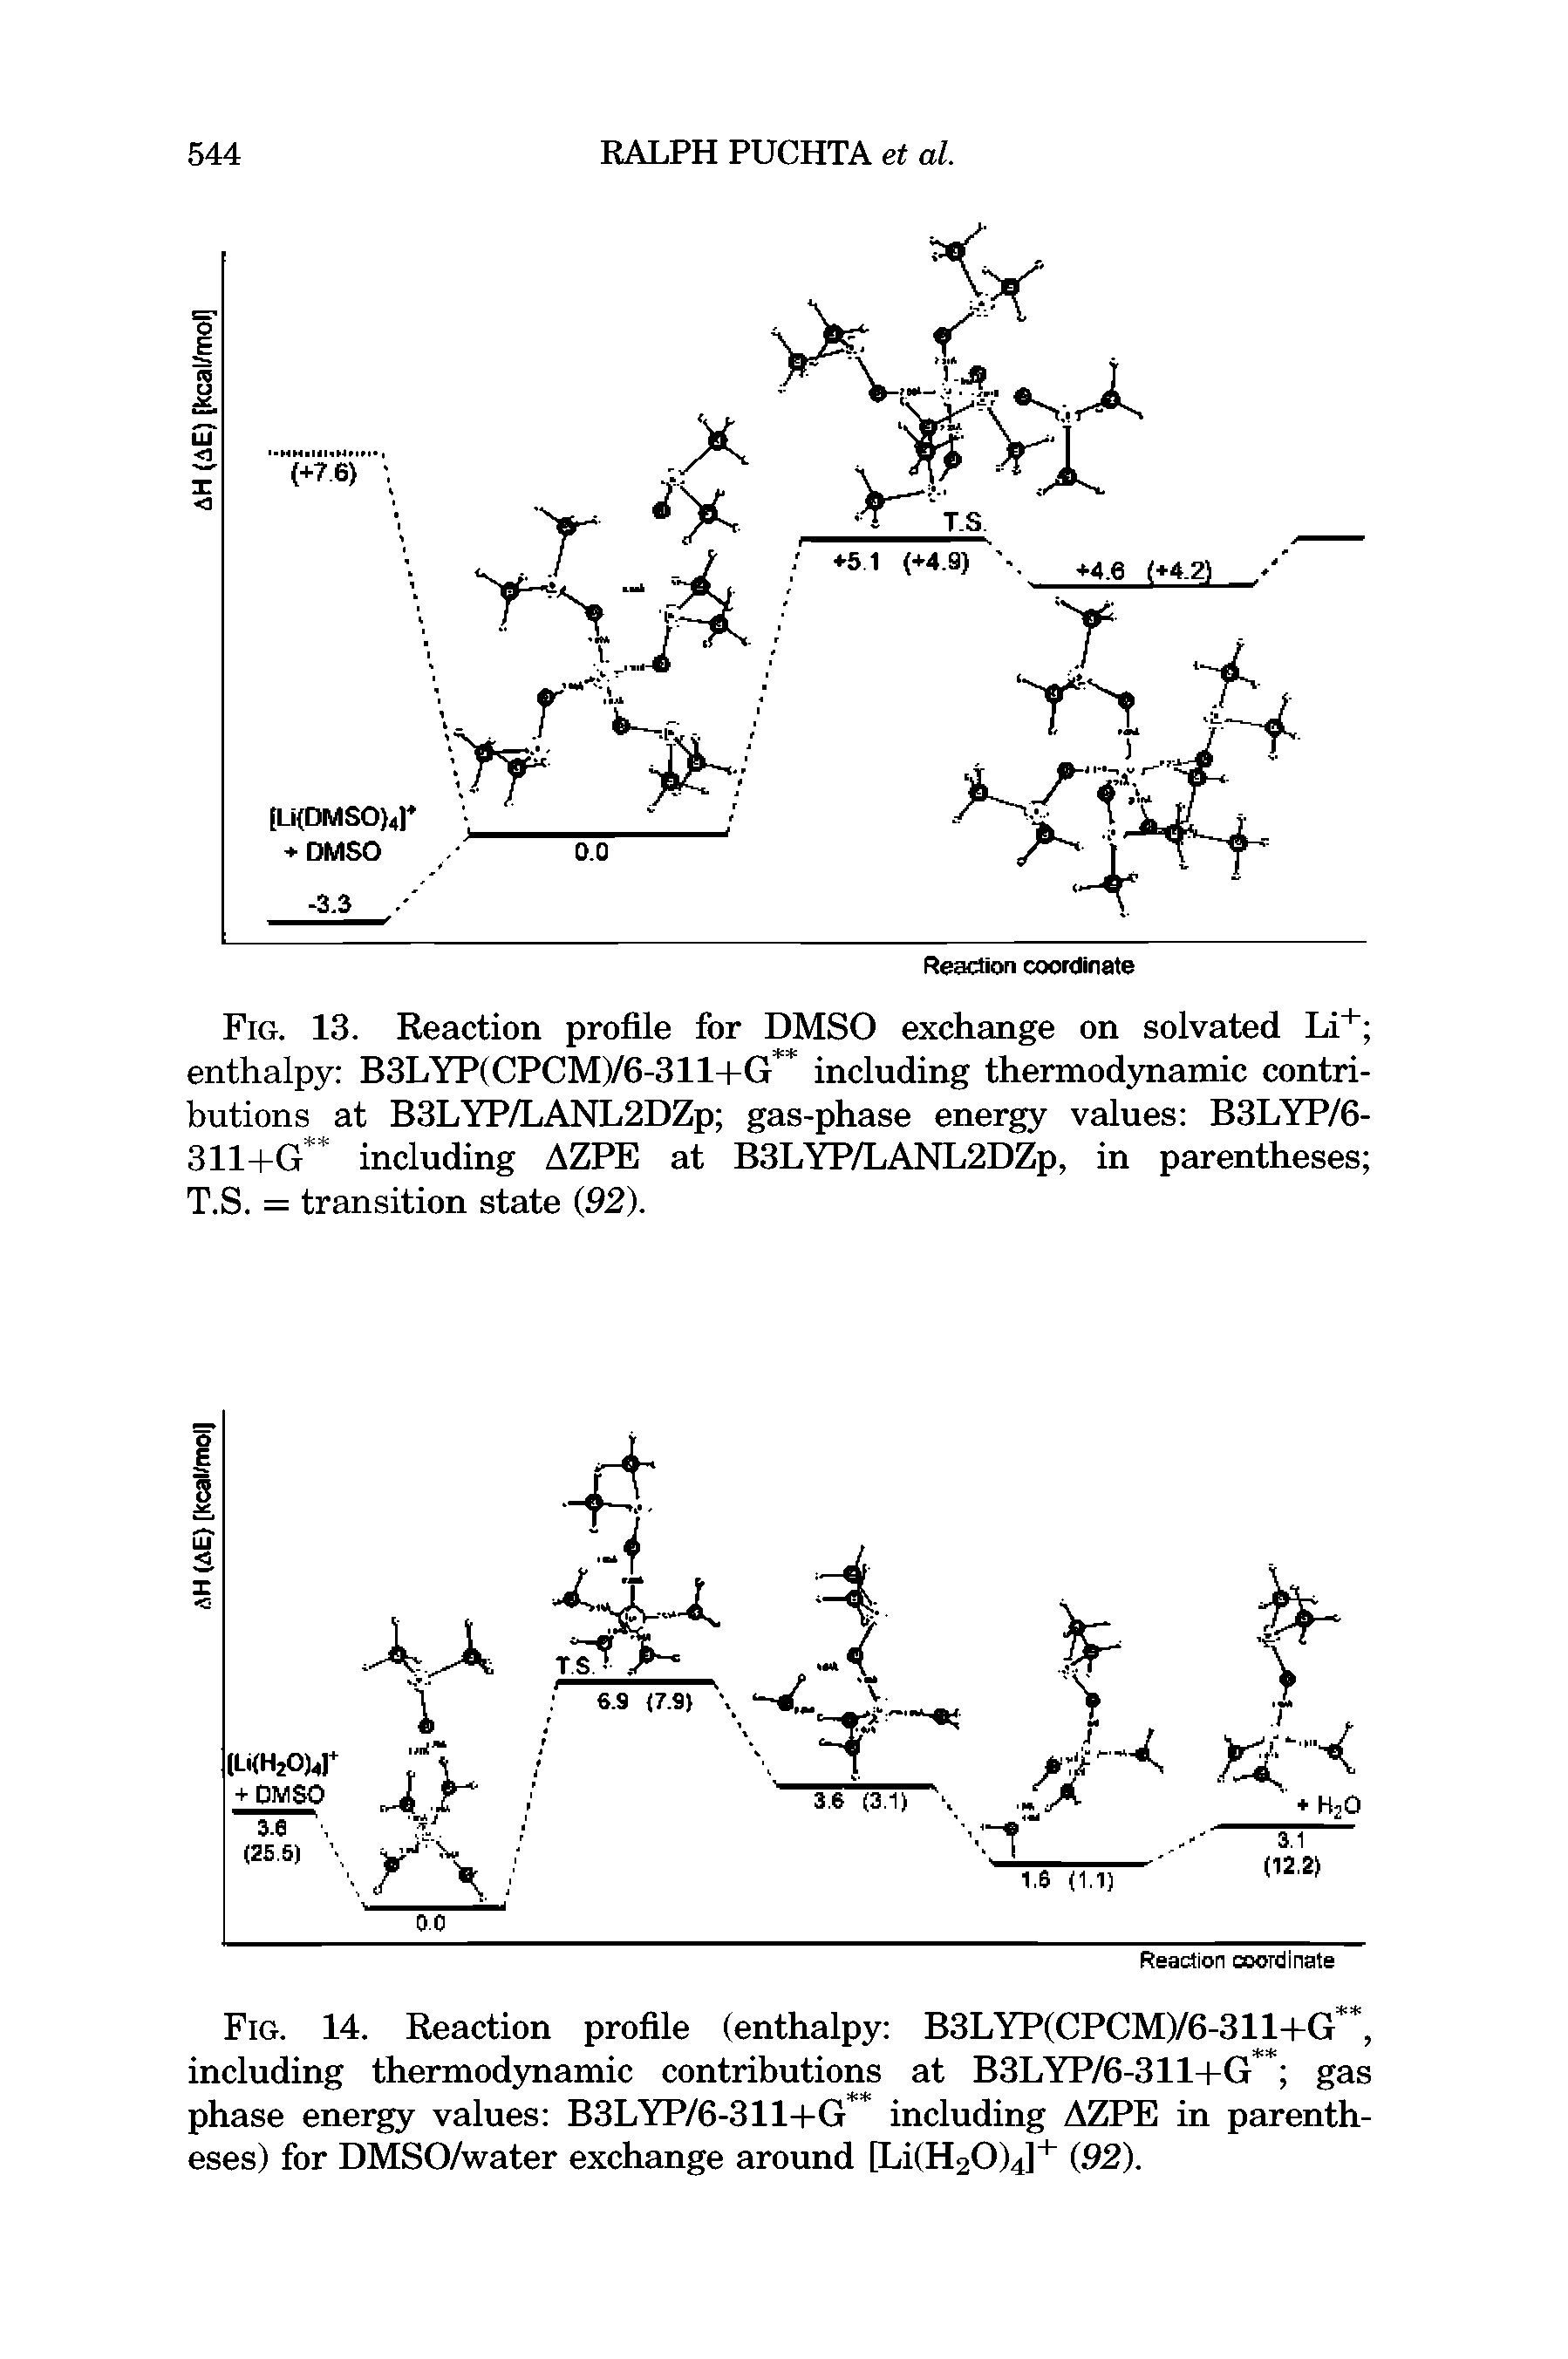 Fig. 13. Reaction profile for DMSO exchange on solvated Li+ enthalpy B3LYP(CPCM)/6-311+G including thermodynamic contributions at B3LYP/LANL2DZp gas-phase energy values B3LYP/6-311+G including AZPE at B3LYP/LANL2DZp, in parentheses T.S. = transition state (92).